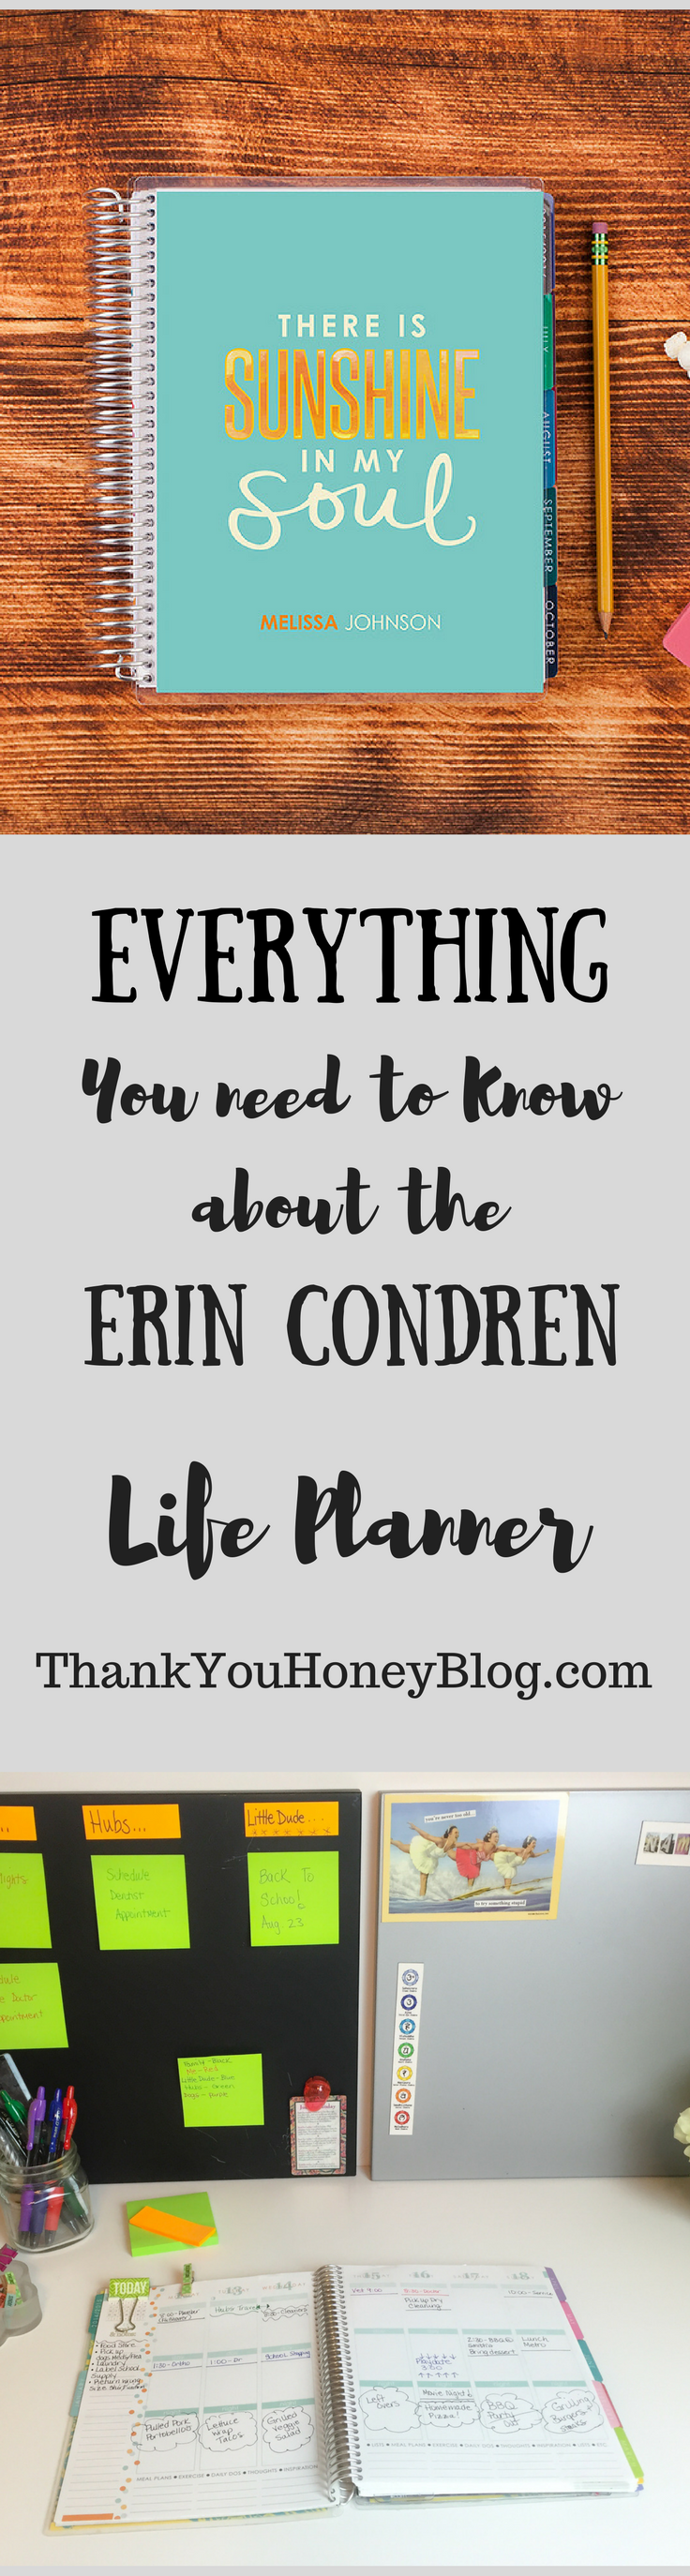 Everything You Need to Know About the Erin Condren Life Planner